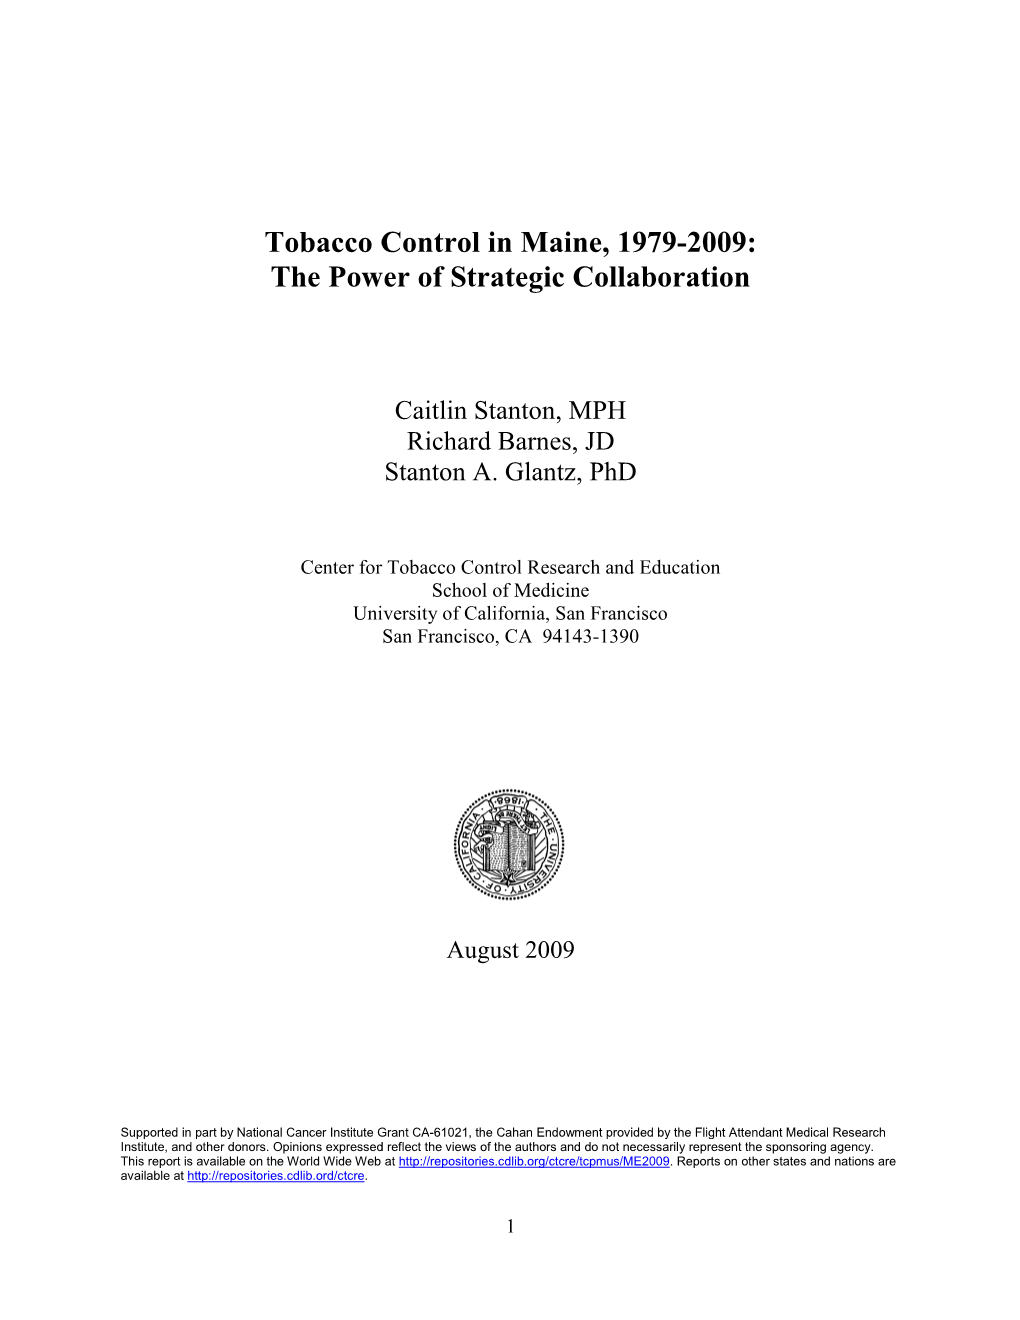 Tobacco Control in Maine, 1979-2009: the Power of Strategic Collaboration